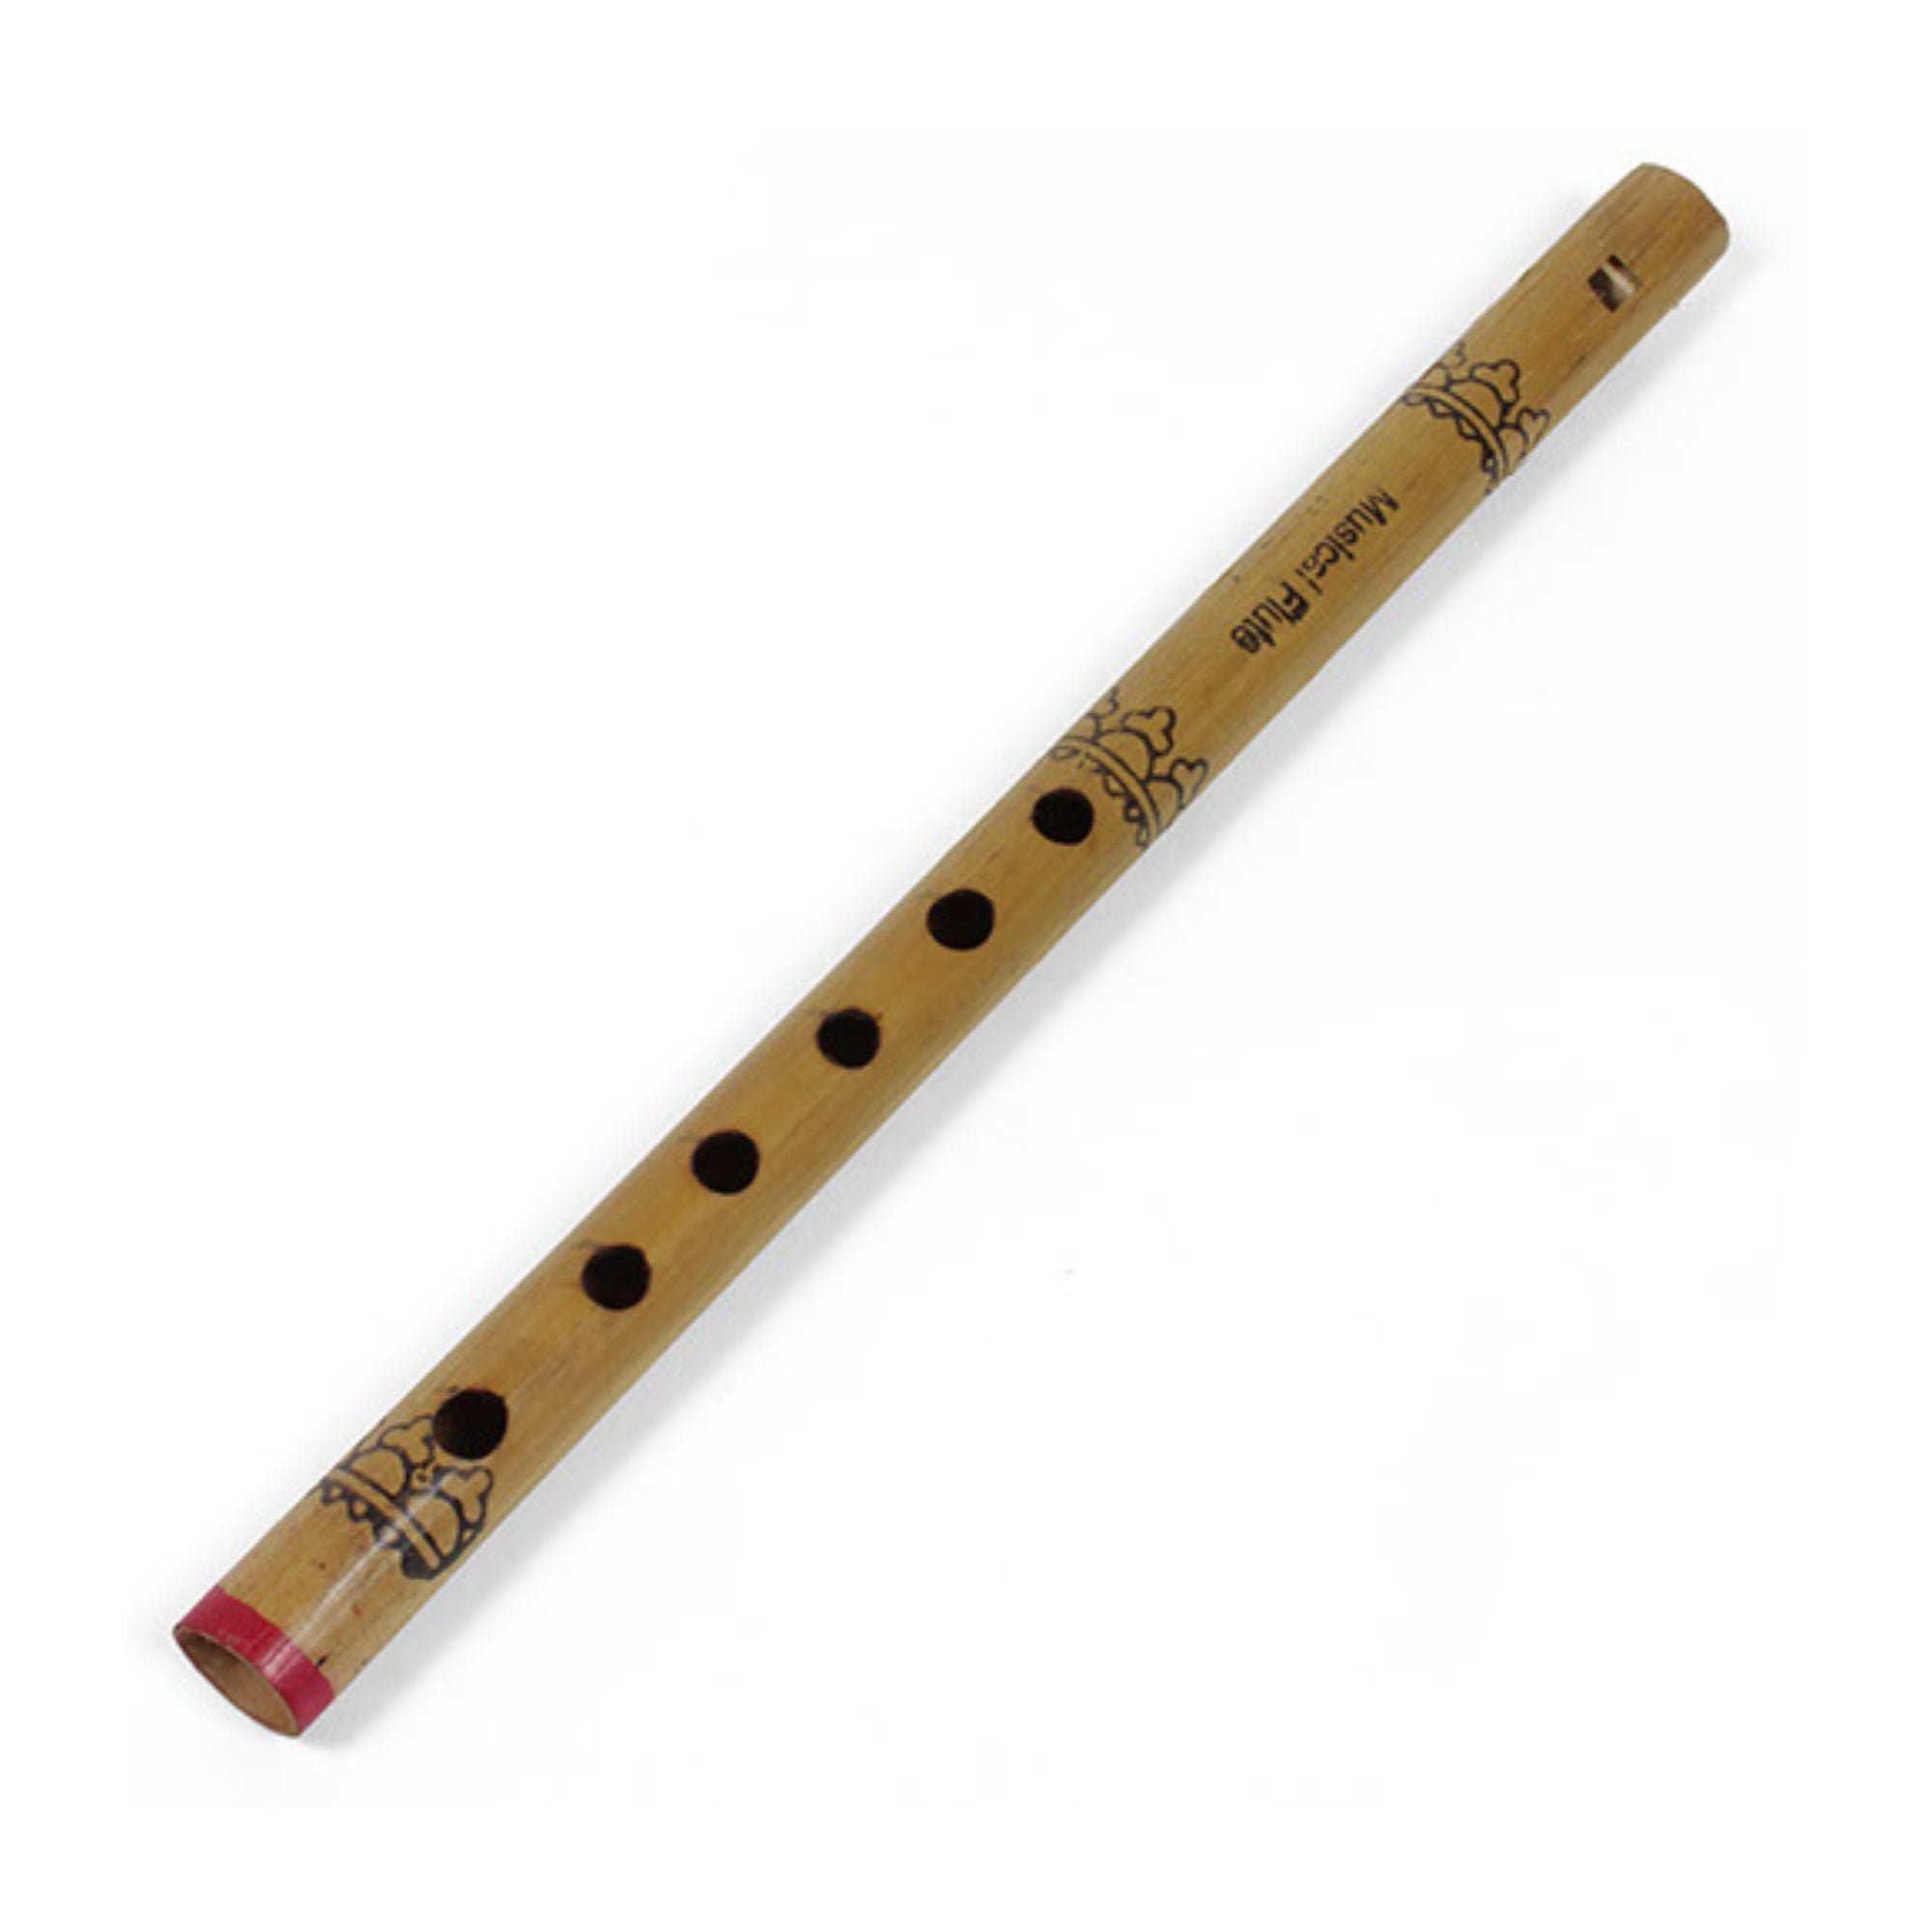 40cm bamboo indian flute